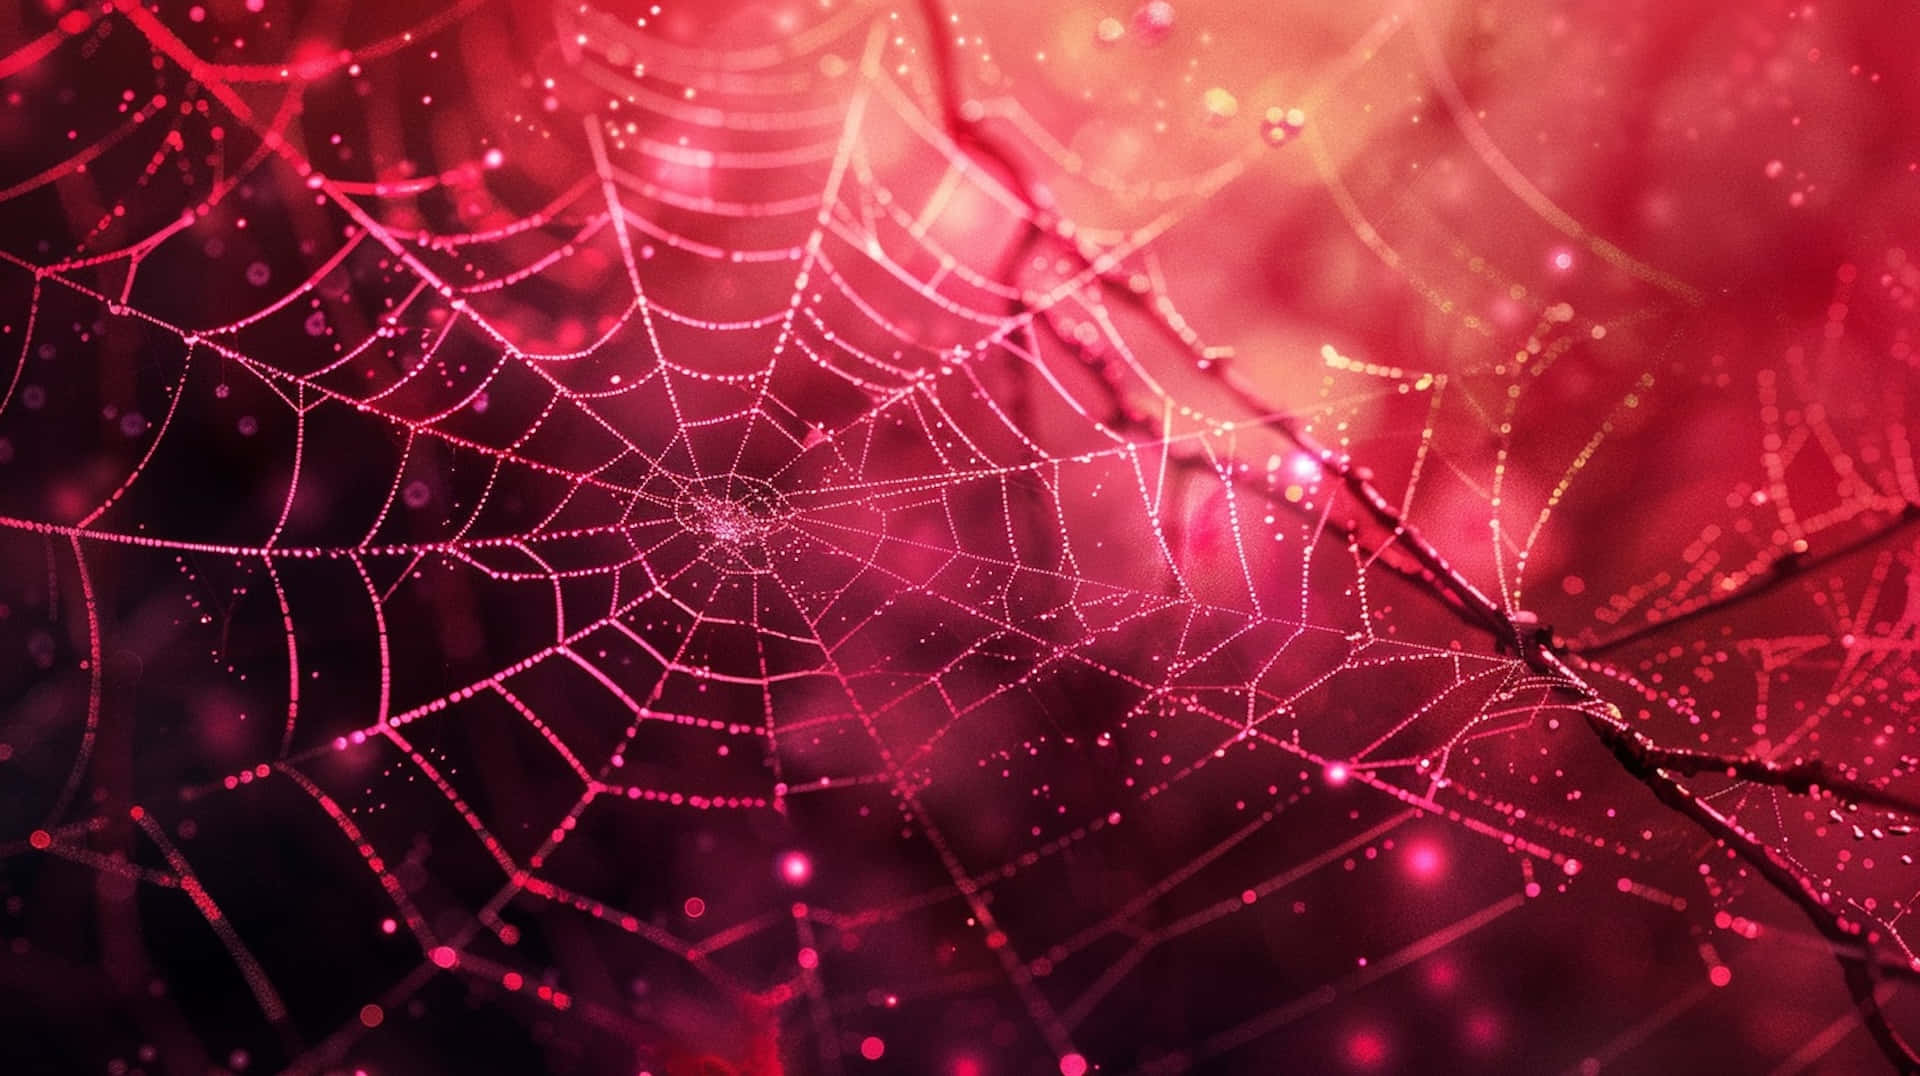 Glowing Spider Web Abstract Wallpaper